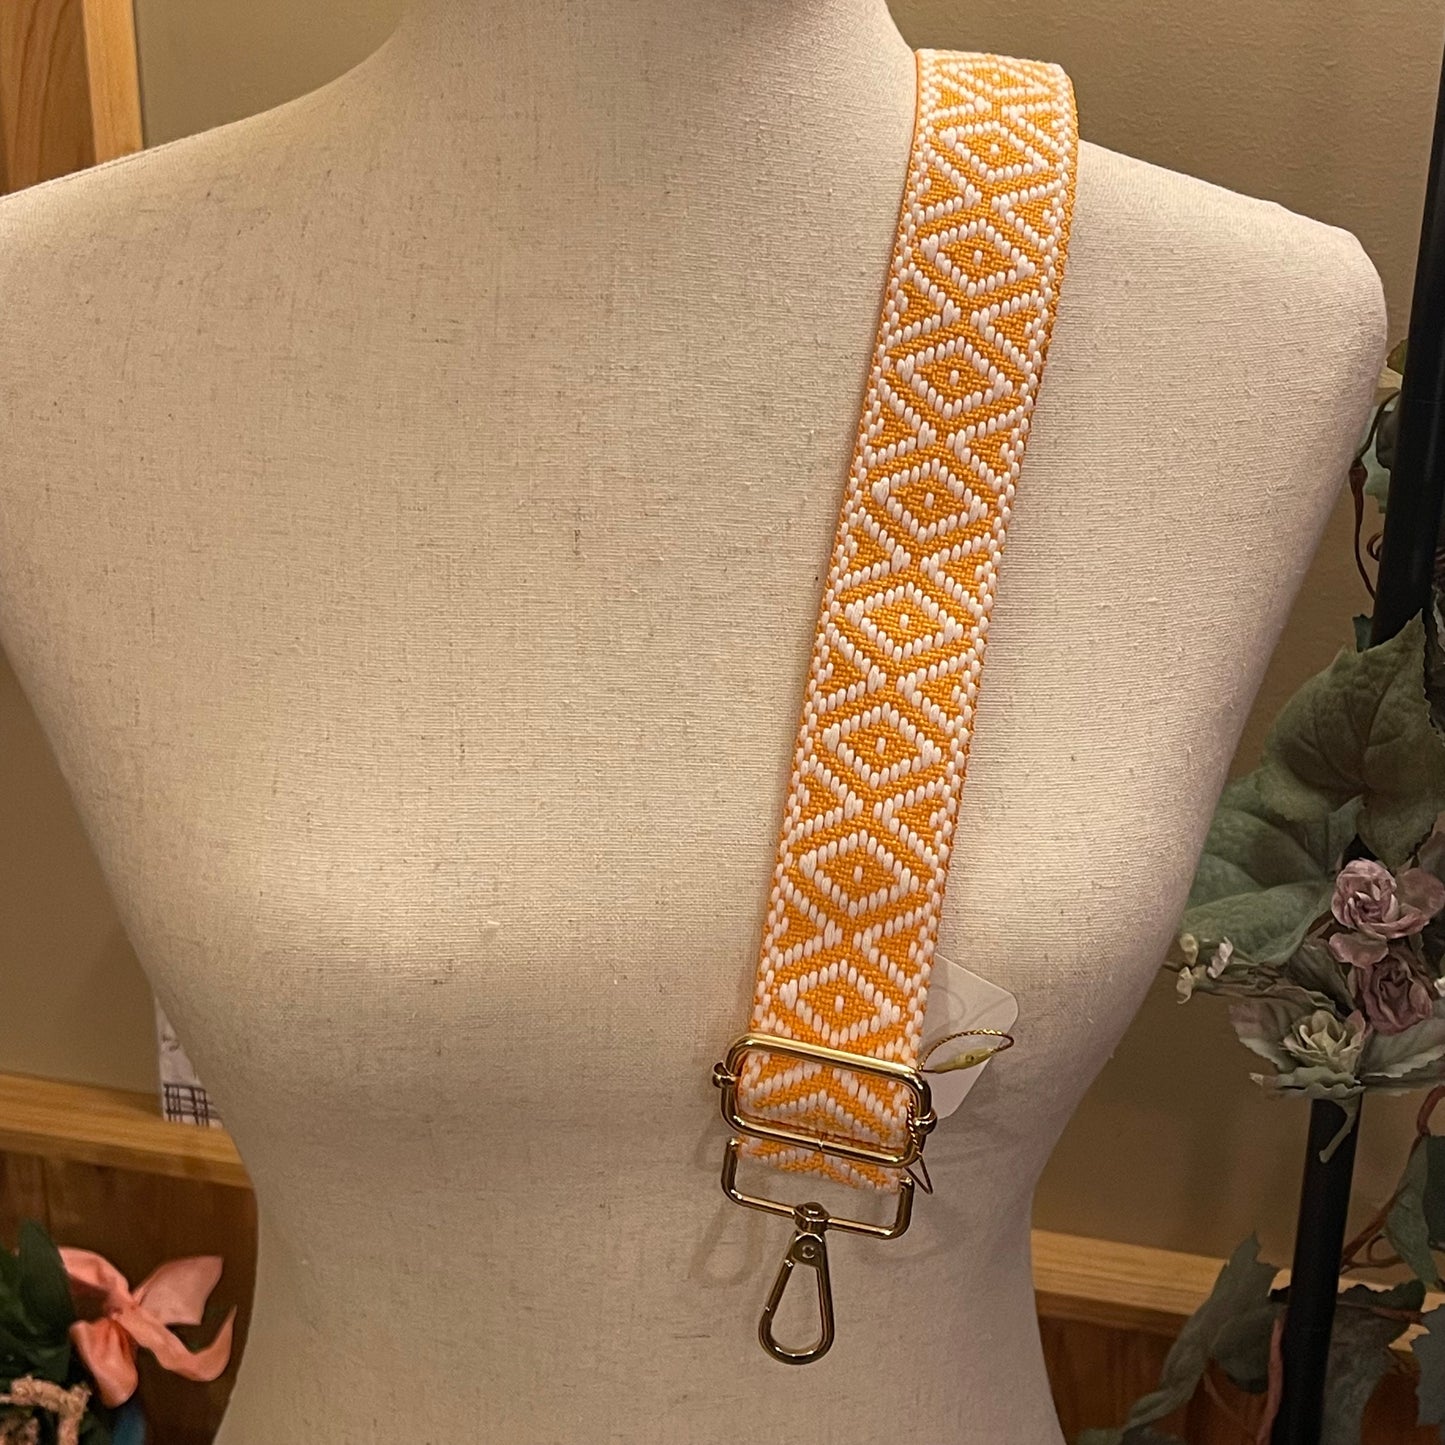 Replacement Guitar Purse Strap